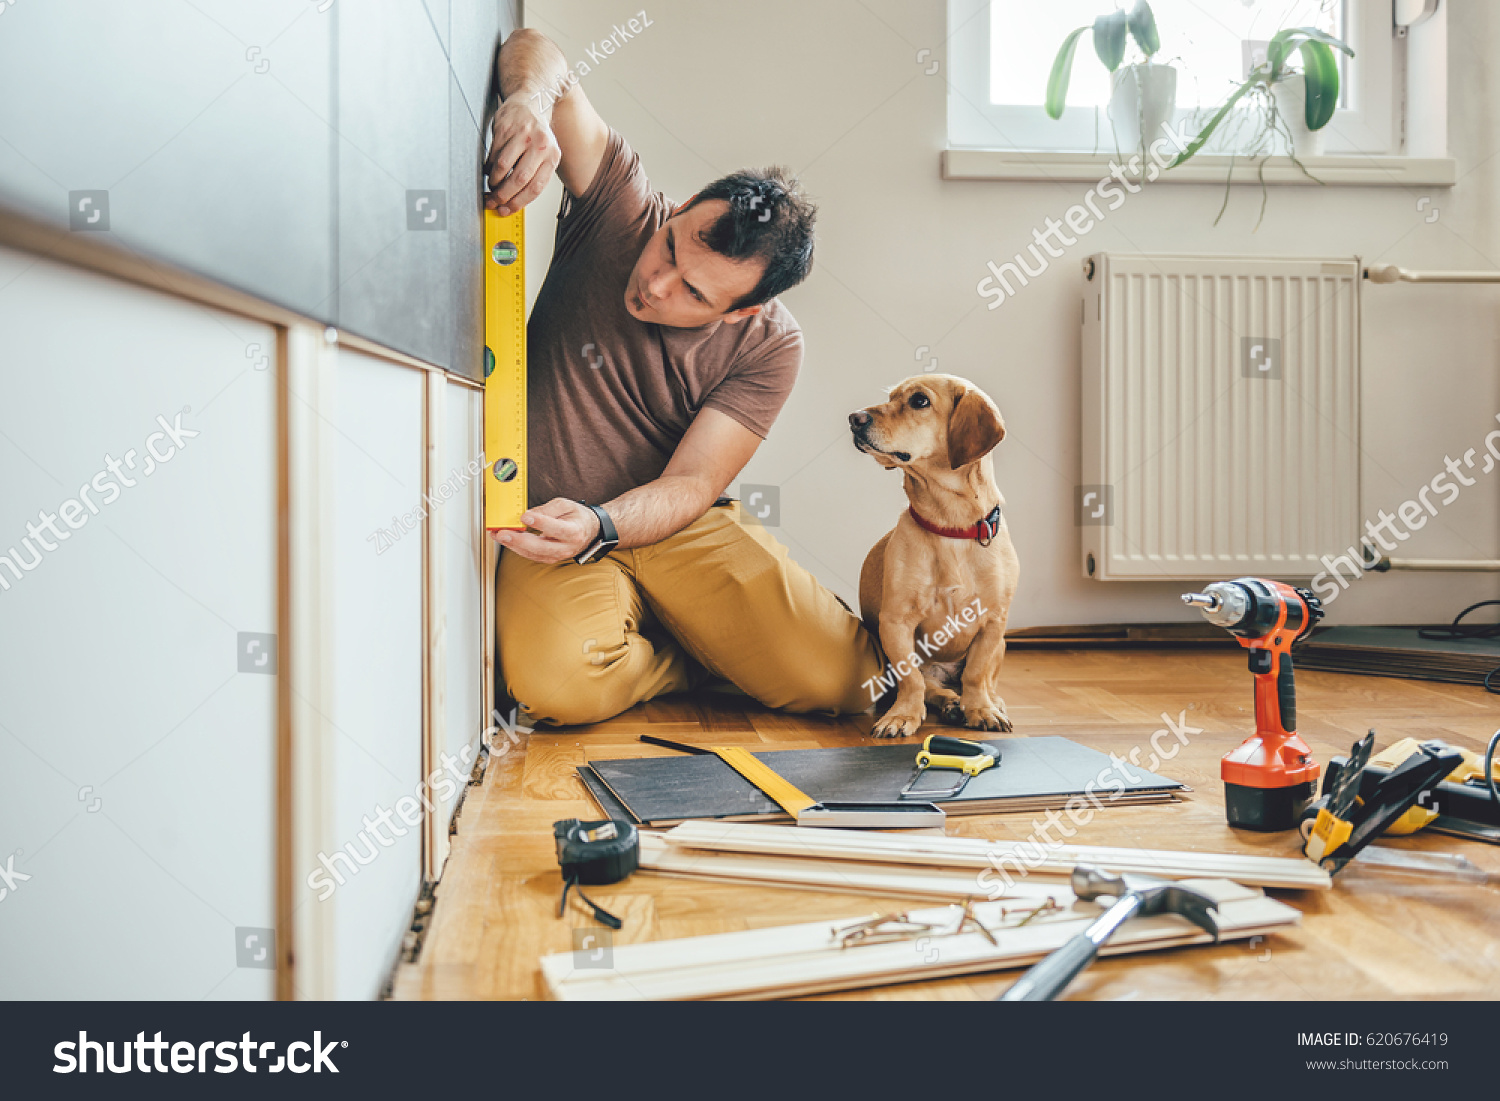 Man doing renovation work at home together with his small yellow dog #620676419